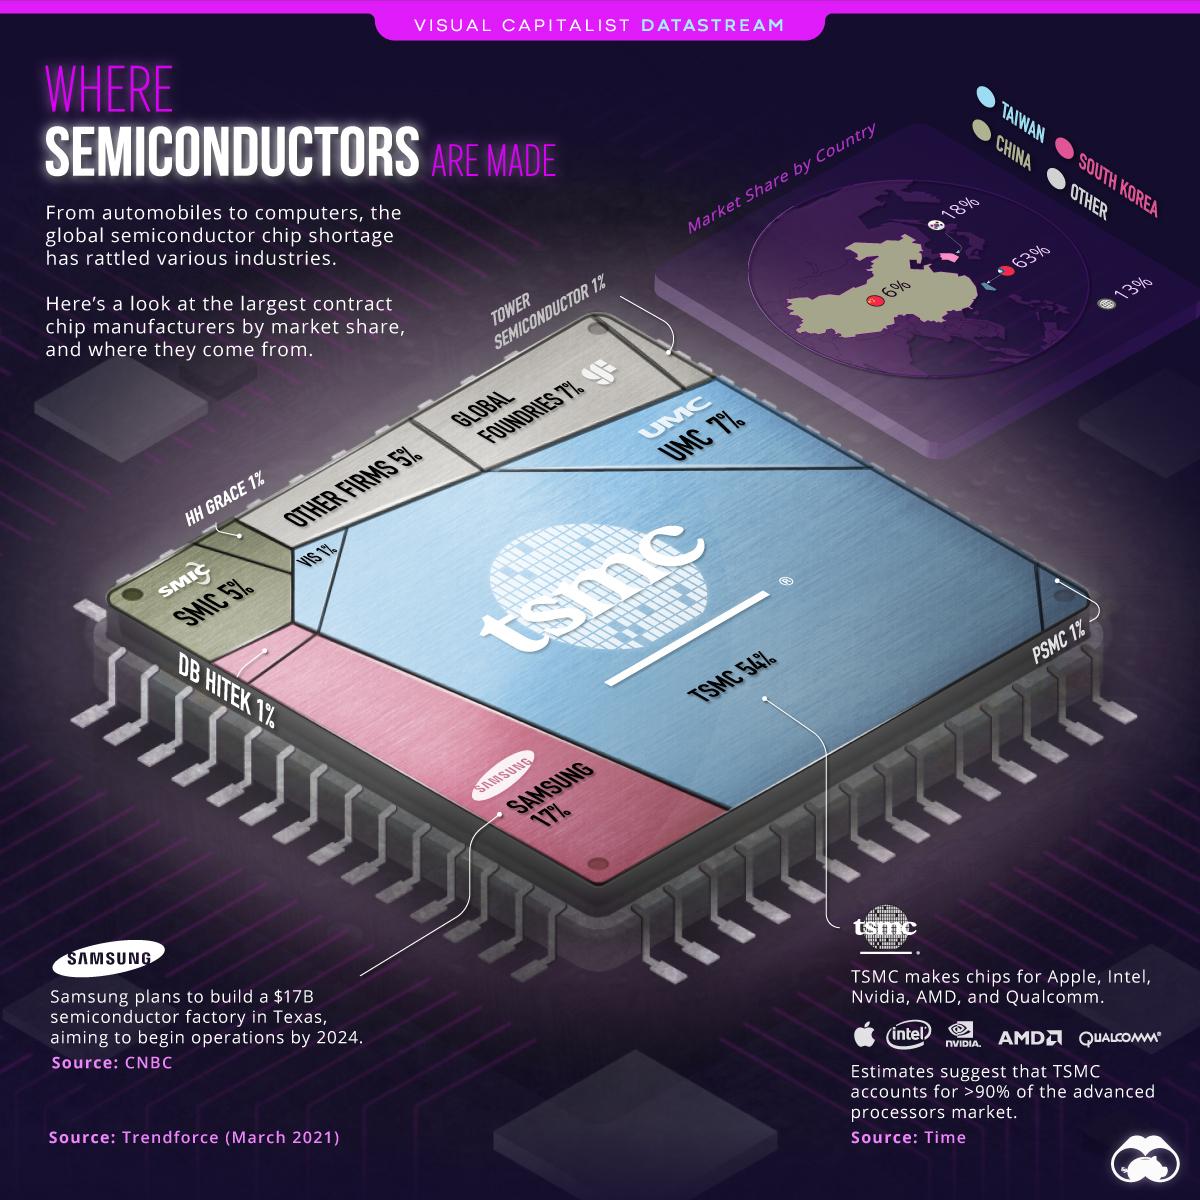 The Top 10 Semiconductor Companies by Market Share